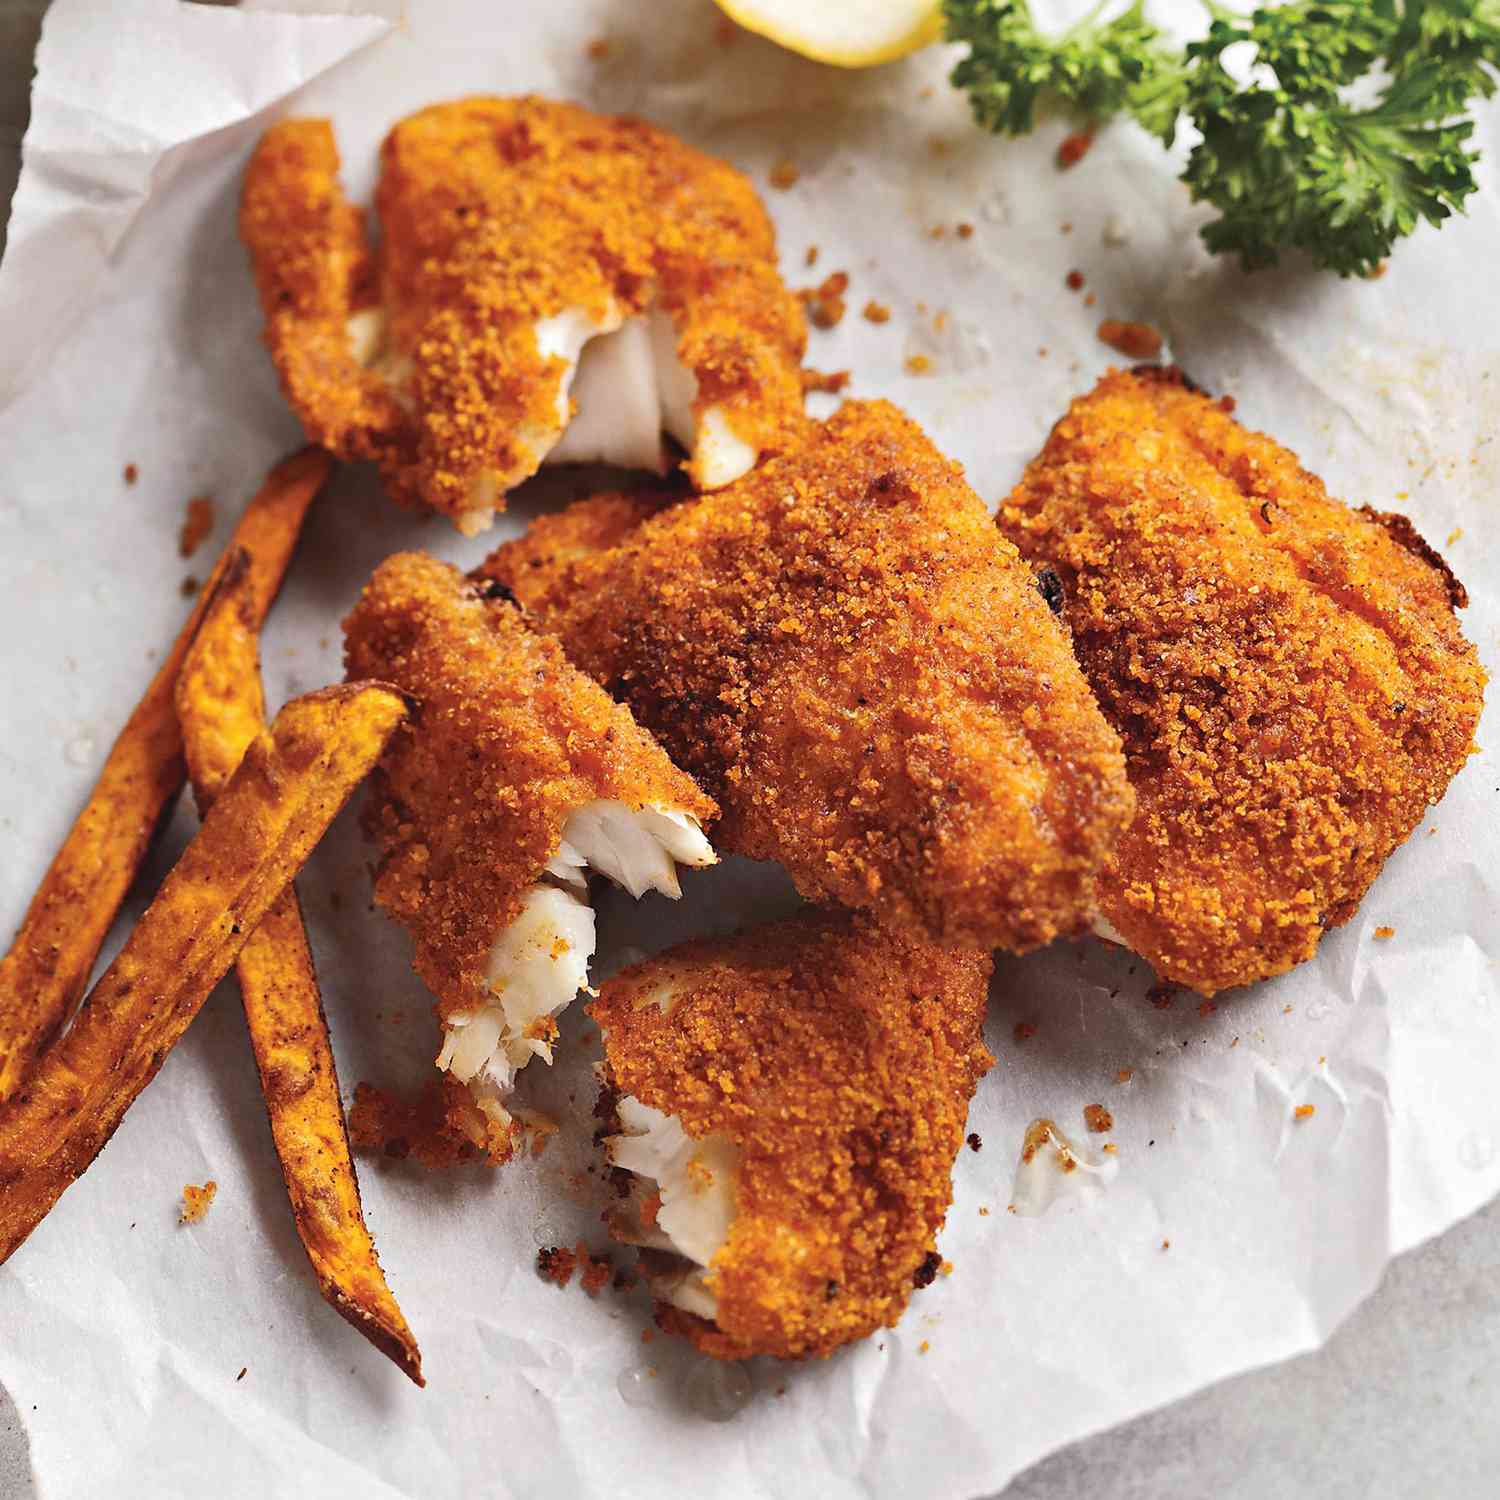 Spicy Oven-Baked Fish and Sweet Potato Fries